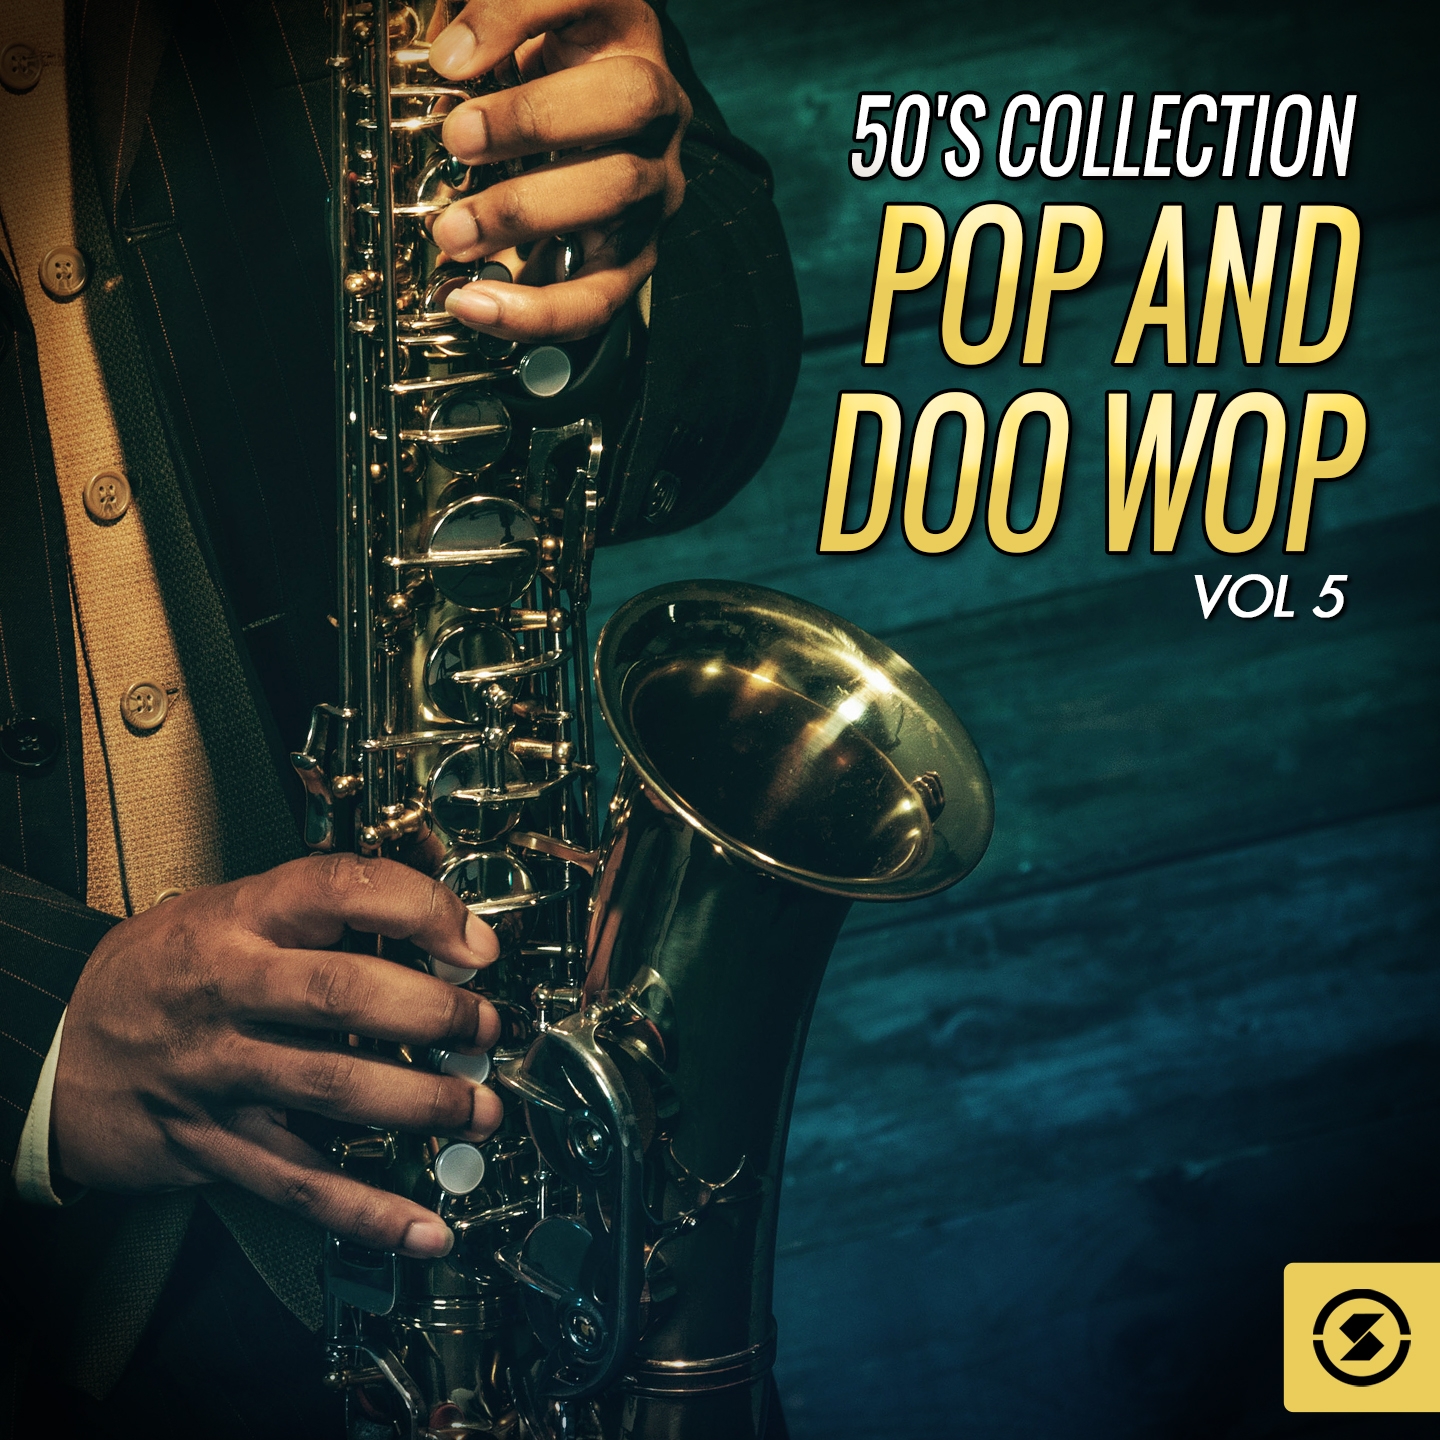 50's Collection, Pop and Doo Wop, Vol. 5